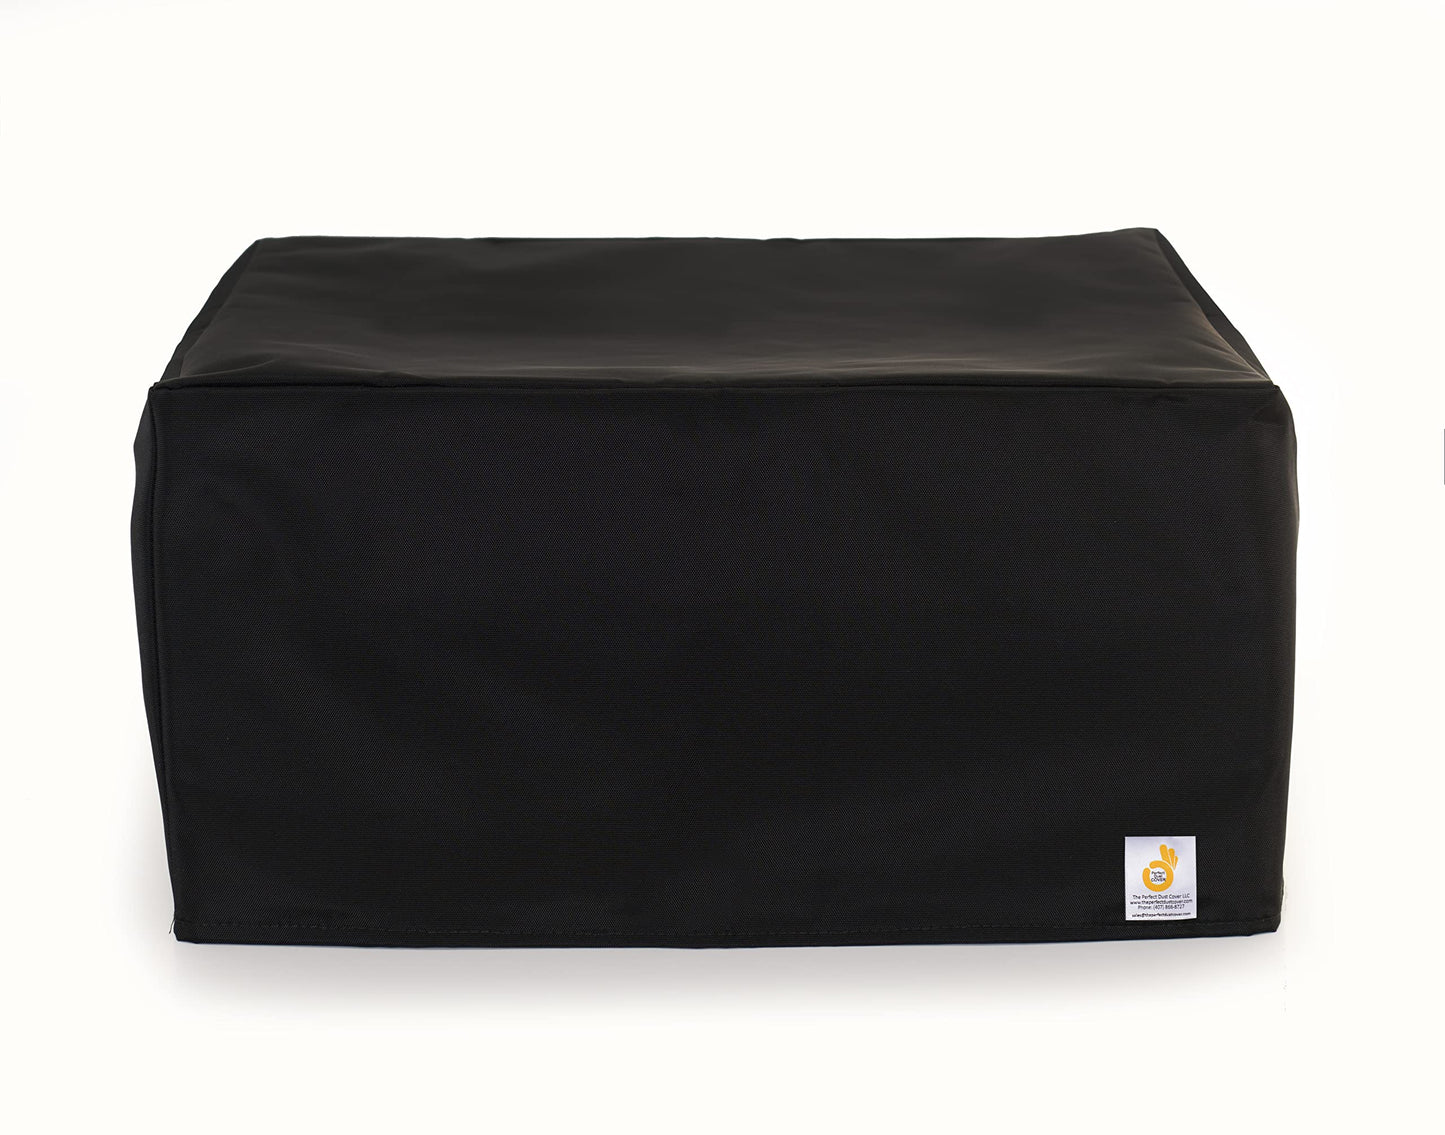 The Perfect Dust Cover, Black Nylon Cover Compatible with Canon PIXMA G7040 All MegaTank Inkjet Printer, Anti Static Double Stitched and Waterproof Dust Cover by The Perfect Dust Cover LLC